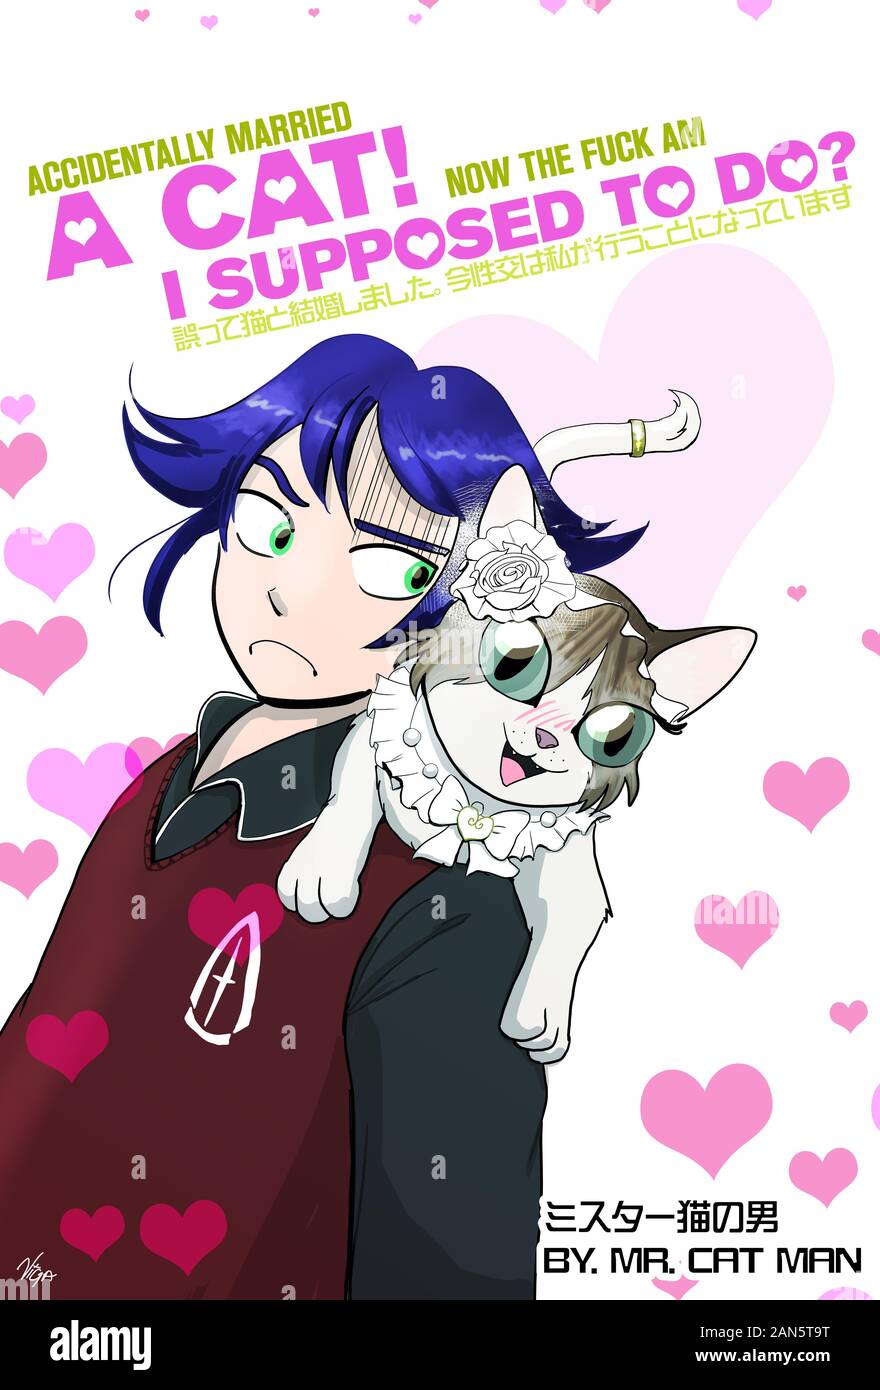 You know those weird light novels from Japan? Here's a parody you can use. 'Accidentally married A CAT! Now wtf am I supposed to do!' Stock Photo